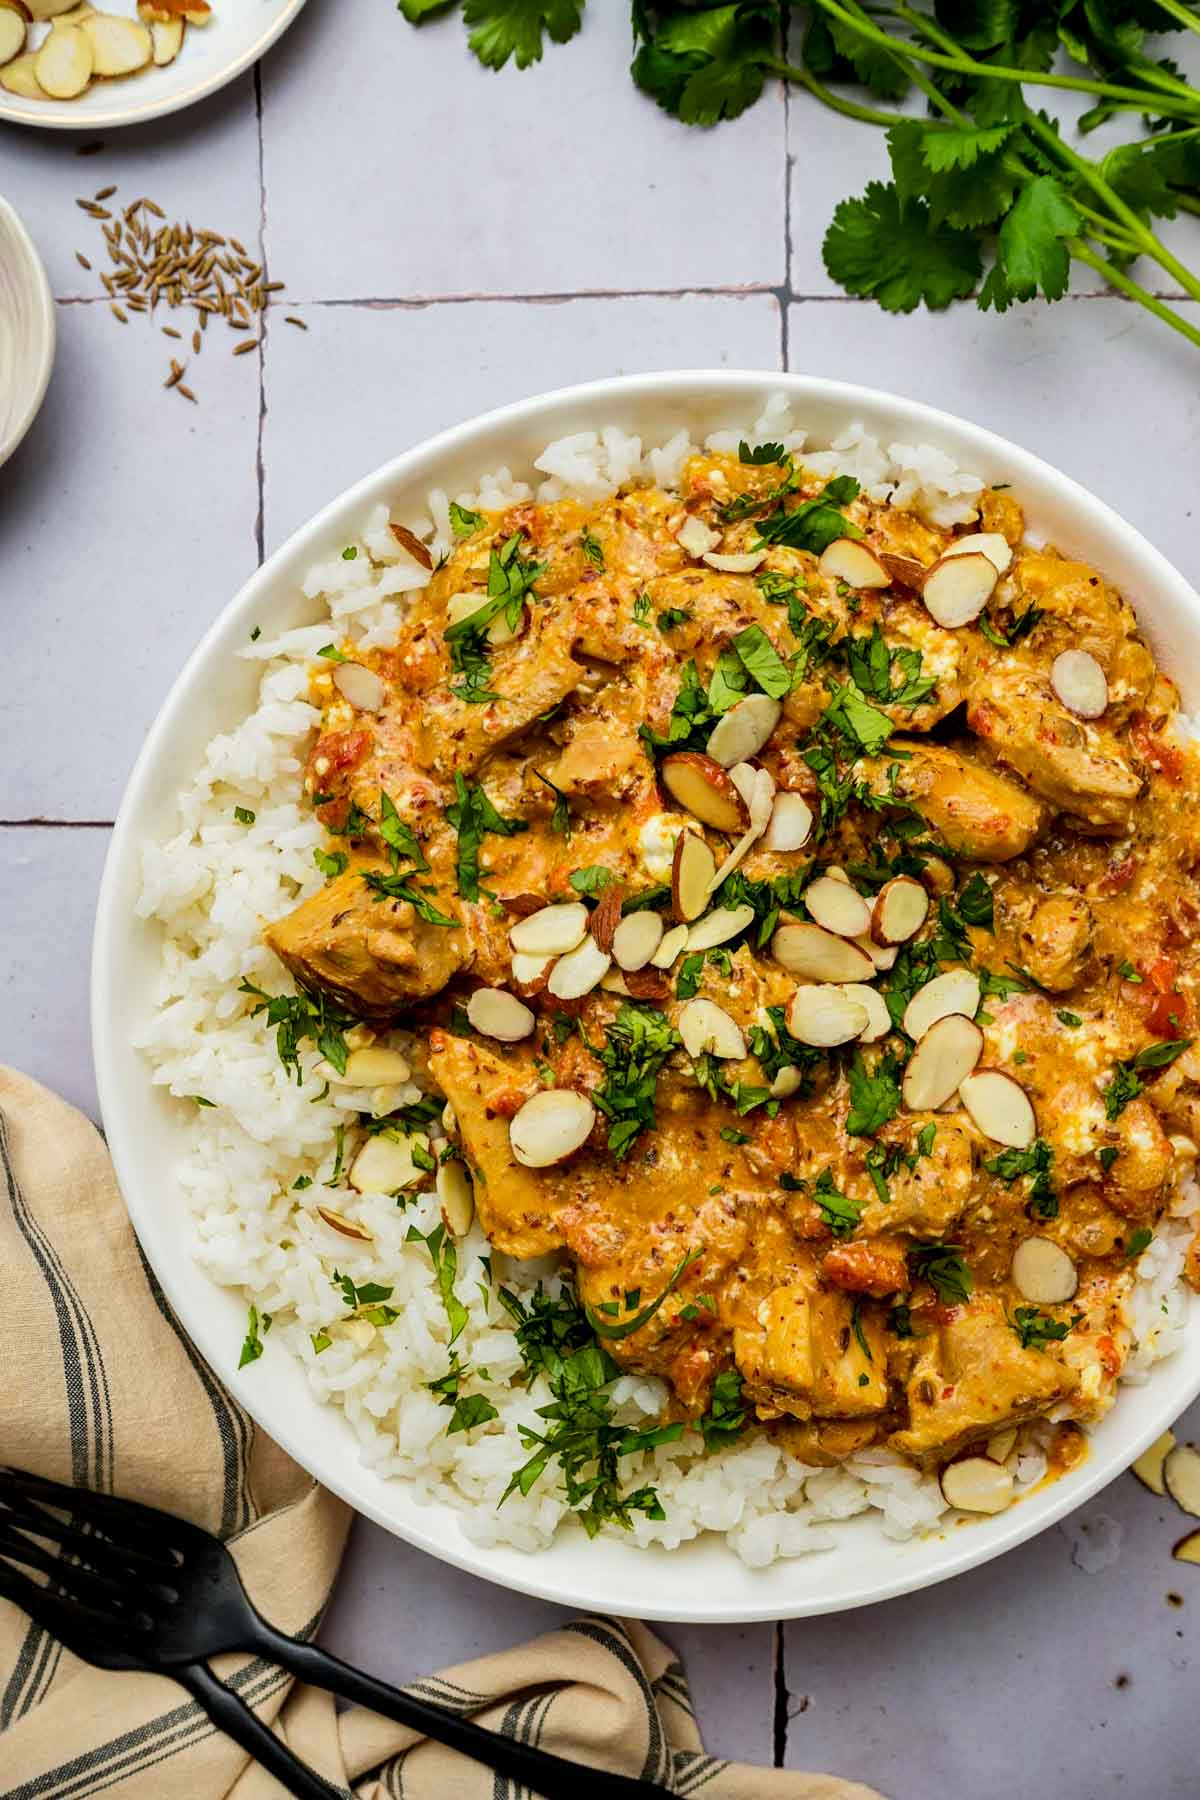 chicken pasanda and rice garnished with almonds and herbs.